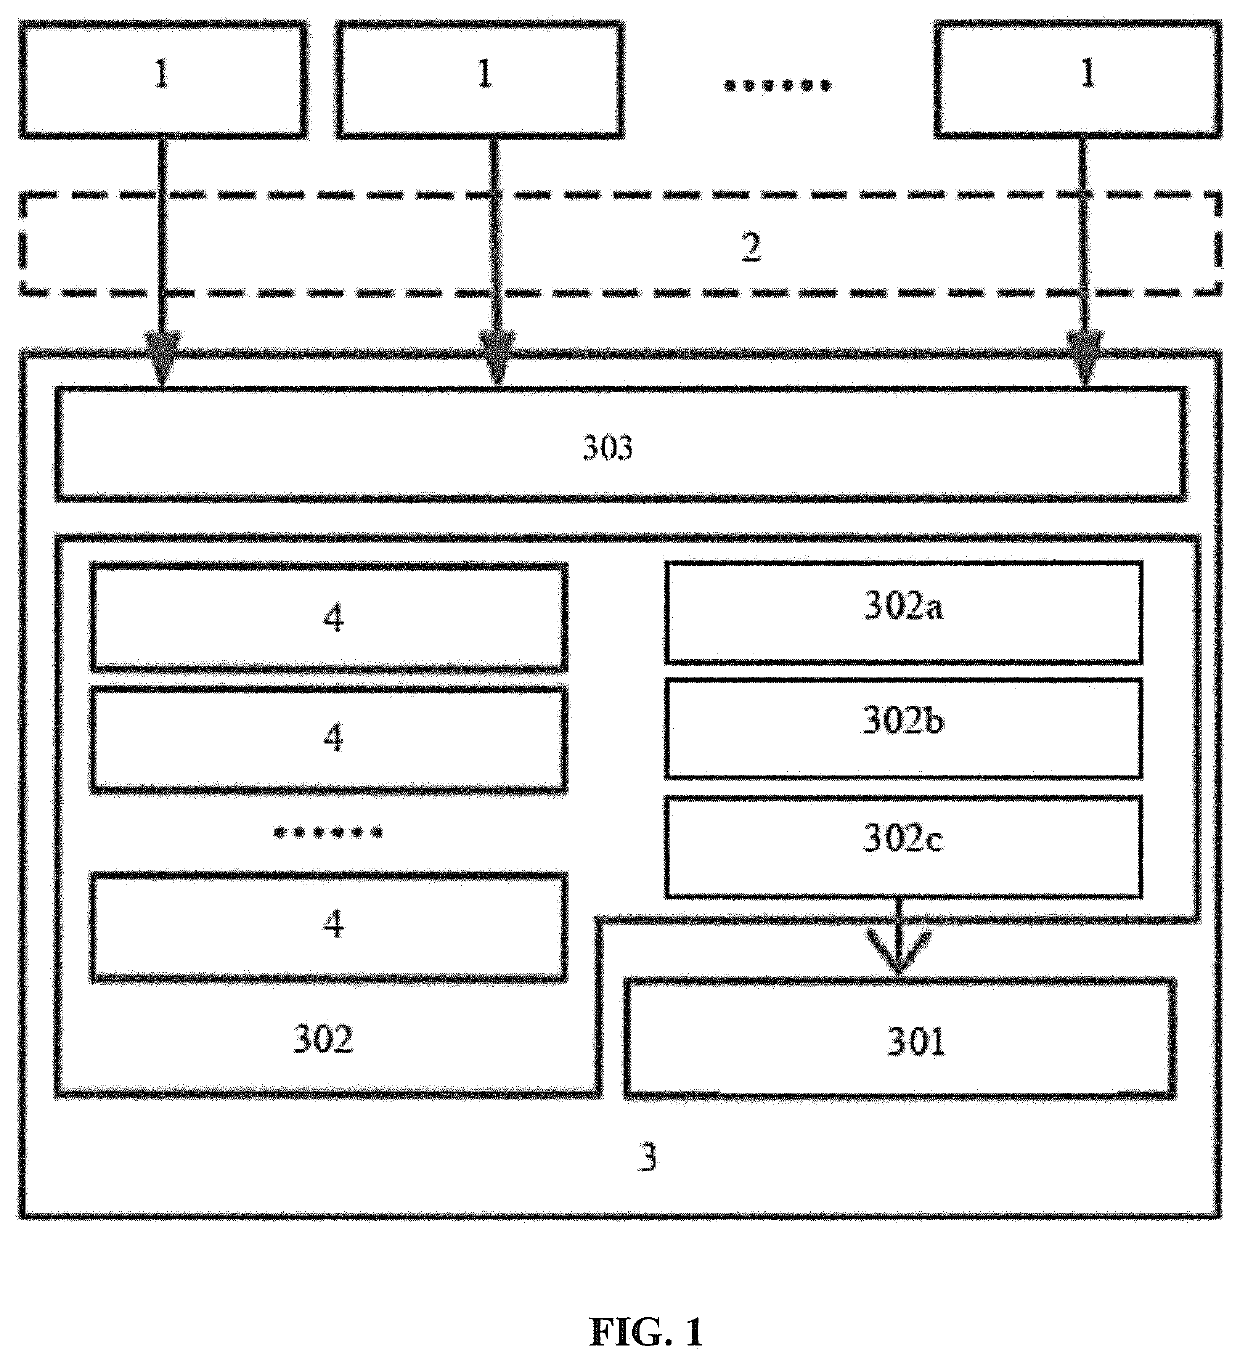 Docker-container-oriented method for isolation of file system resources